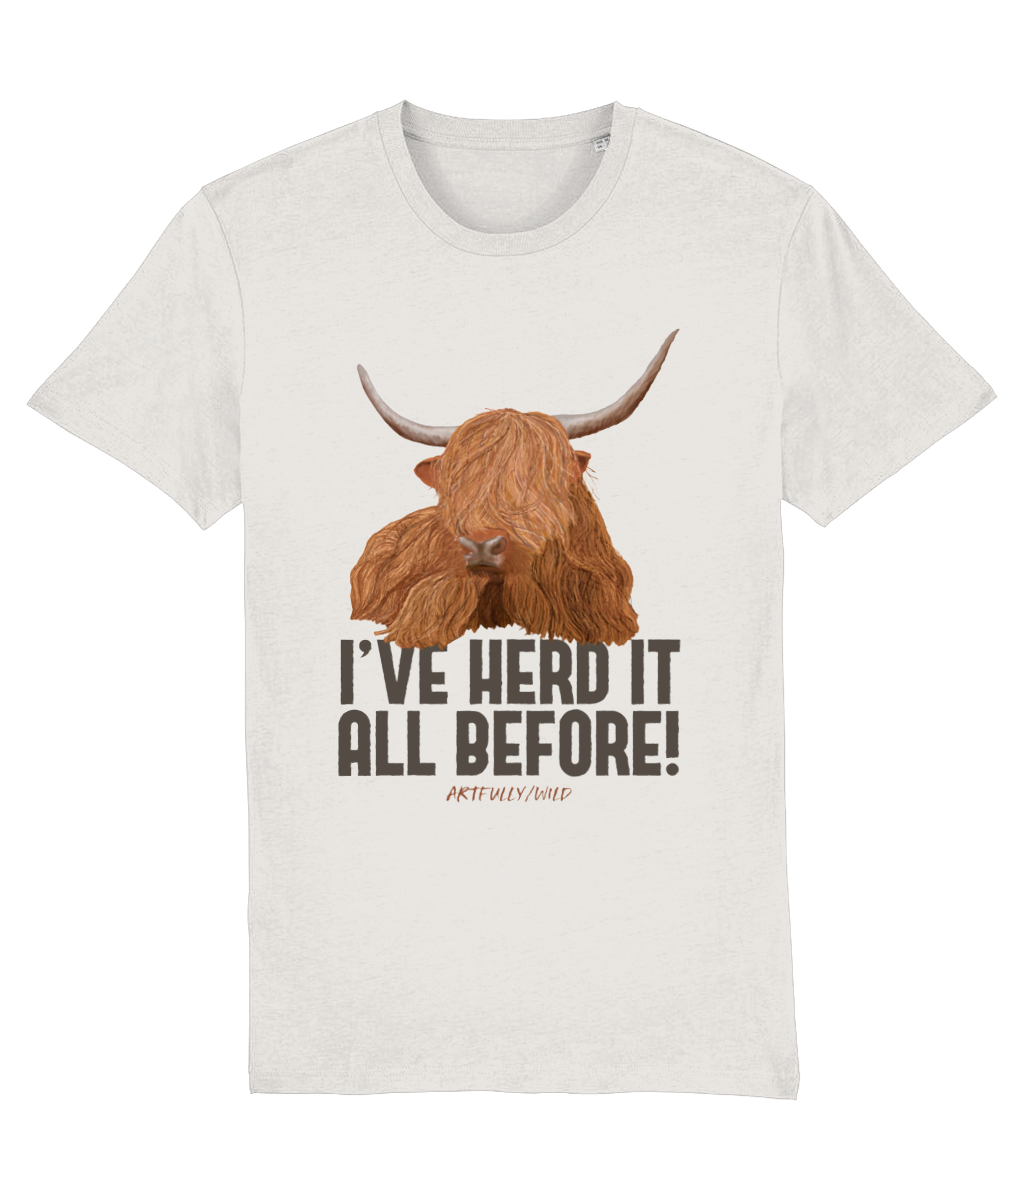 'HERD IT' HIGHLAND COW Print on Vintage White T-Shirt. Unisex/Women/Men. Sustainable Organic Cotton Clothing. Original Illustration by Artfully/Wild. Printed with water-based inks in the UK for wildlife lovers.